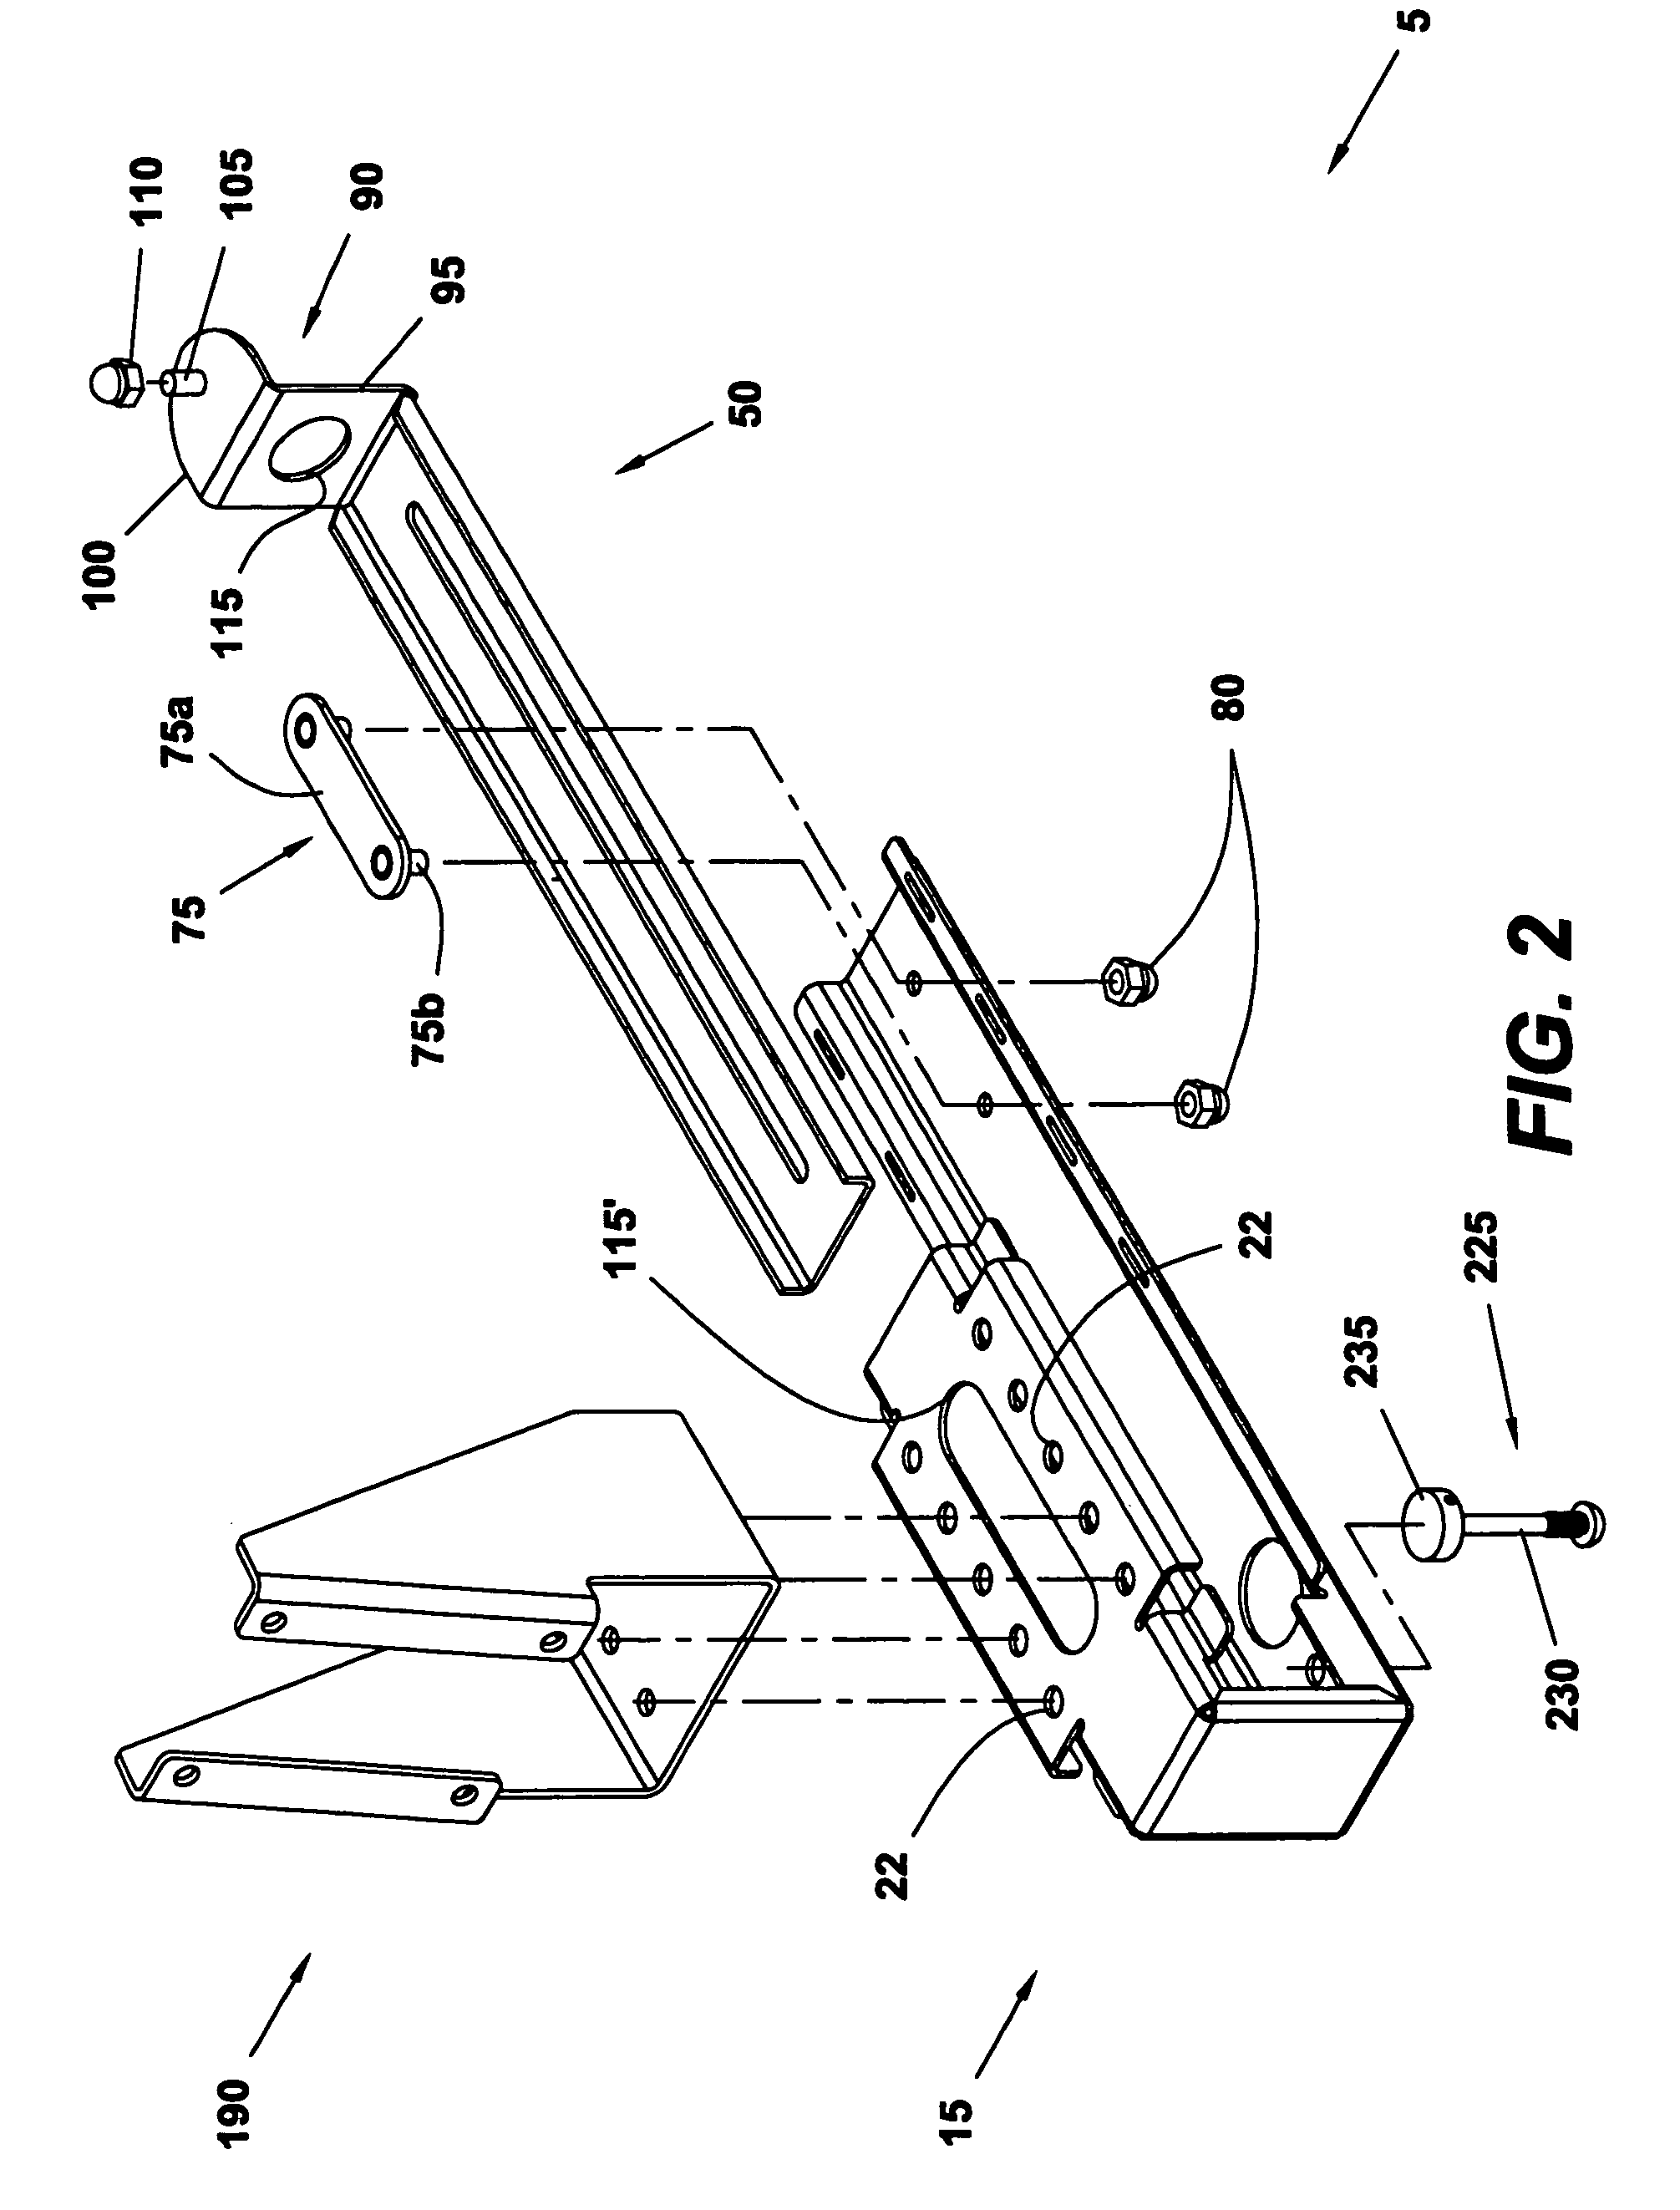 Adjustable bracket assembly for shelf-mounted electronic display device